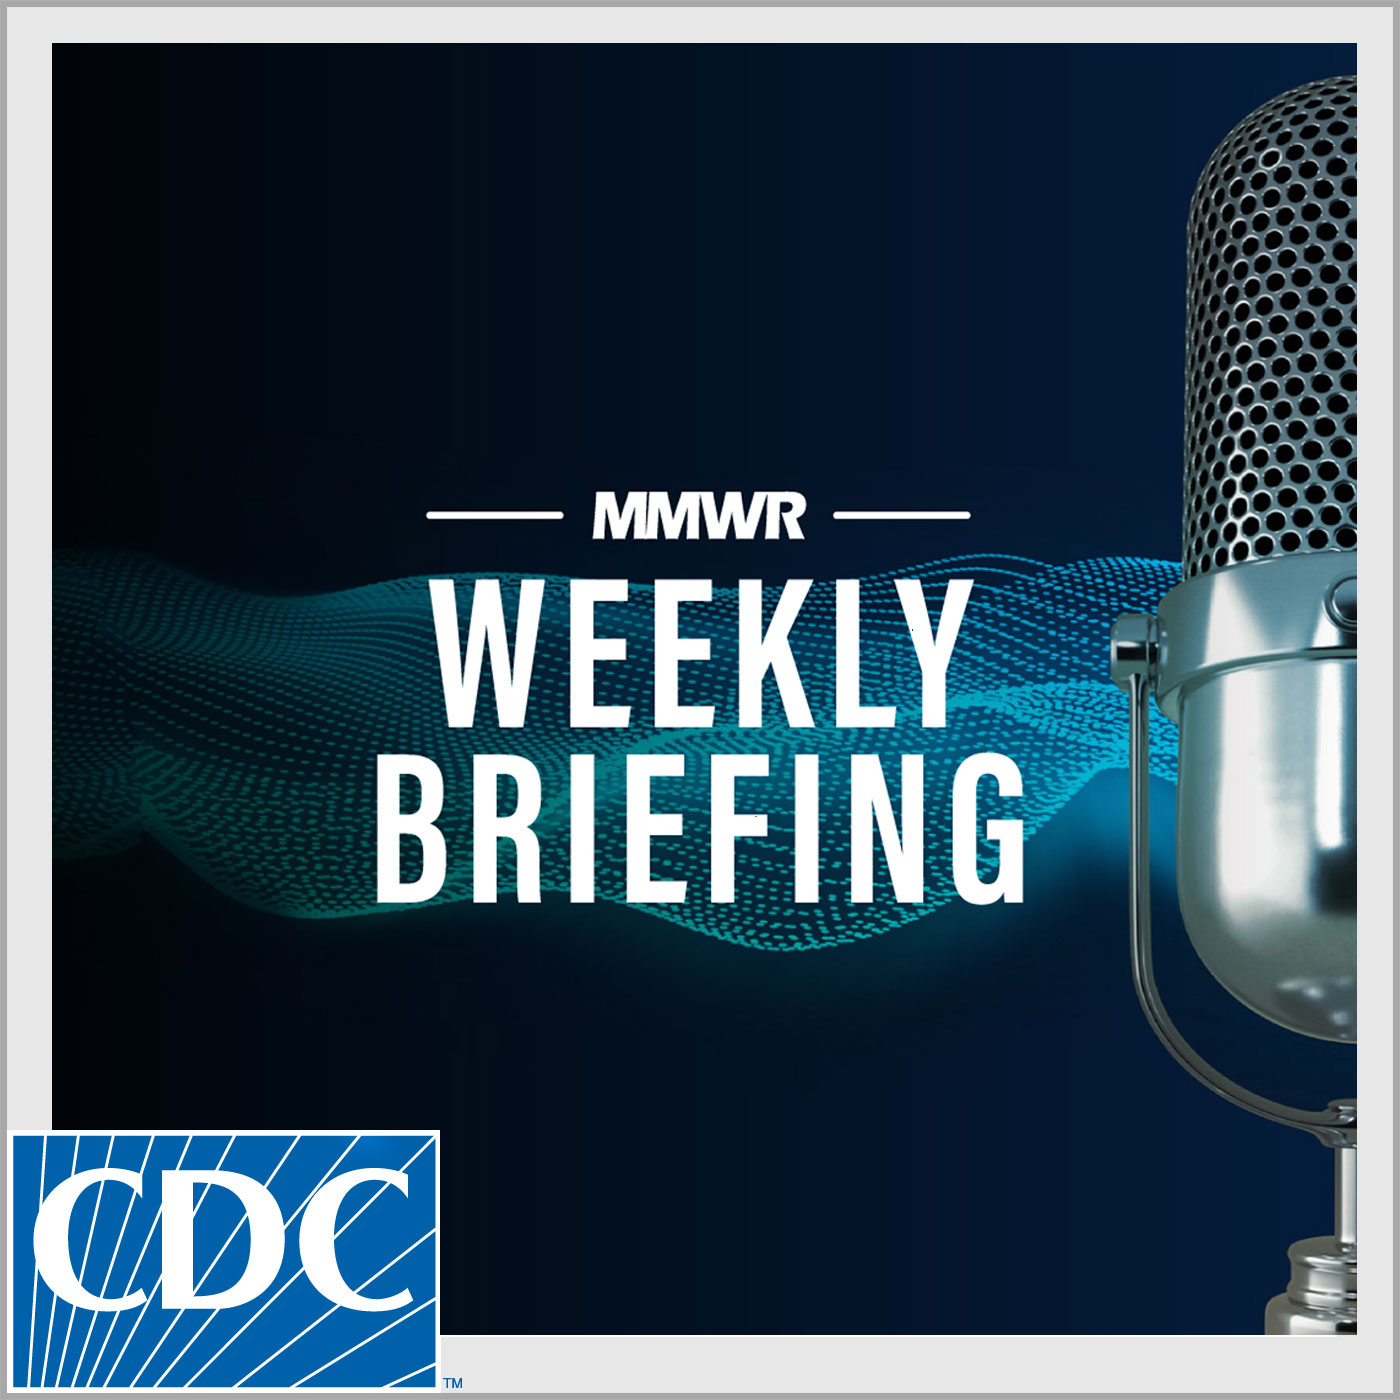 MMWR Weekly Briefing Podcast artwork